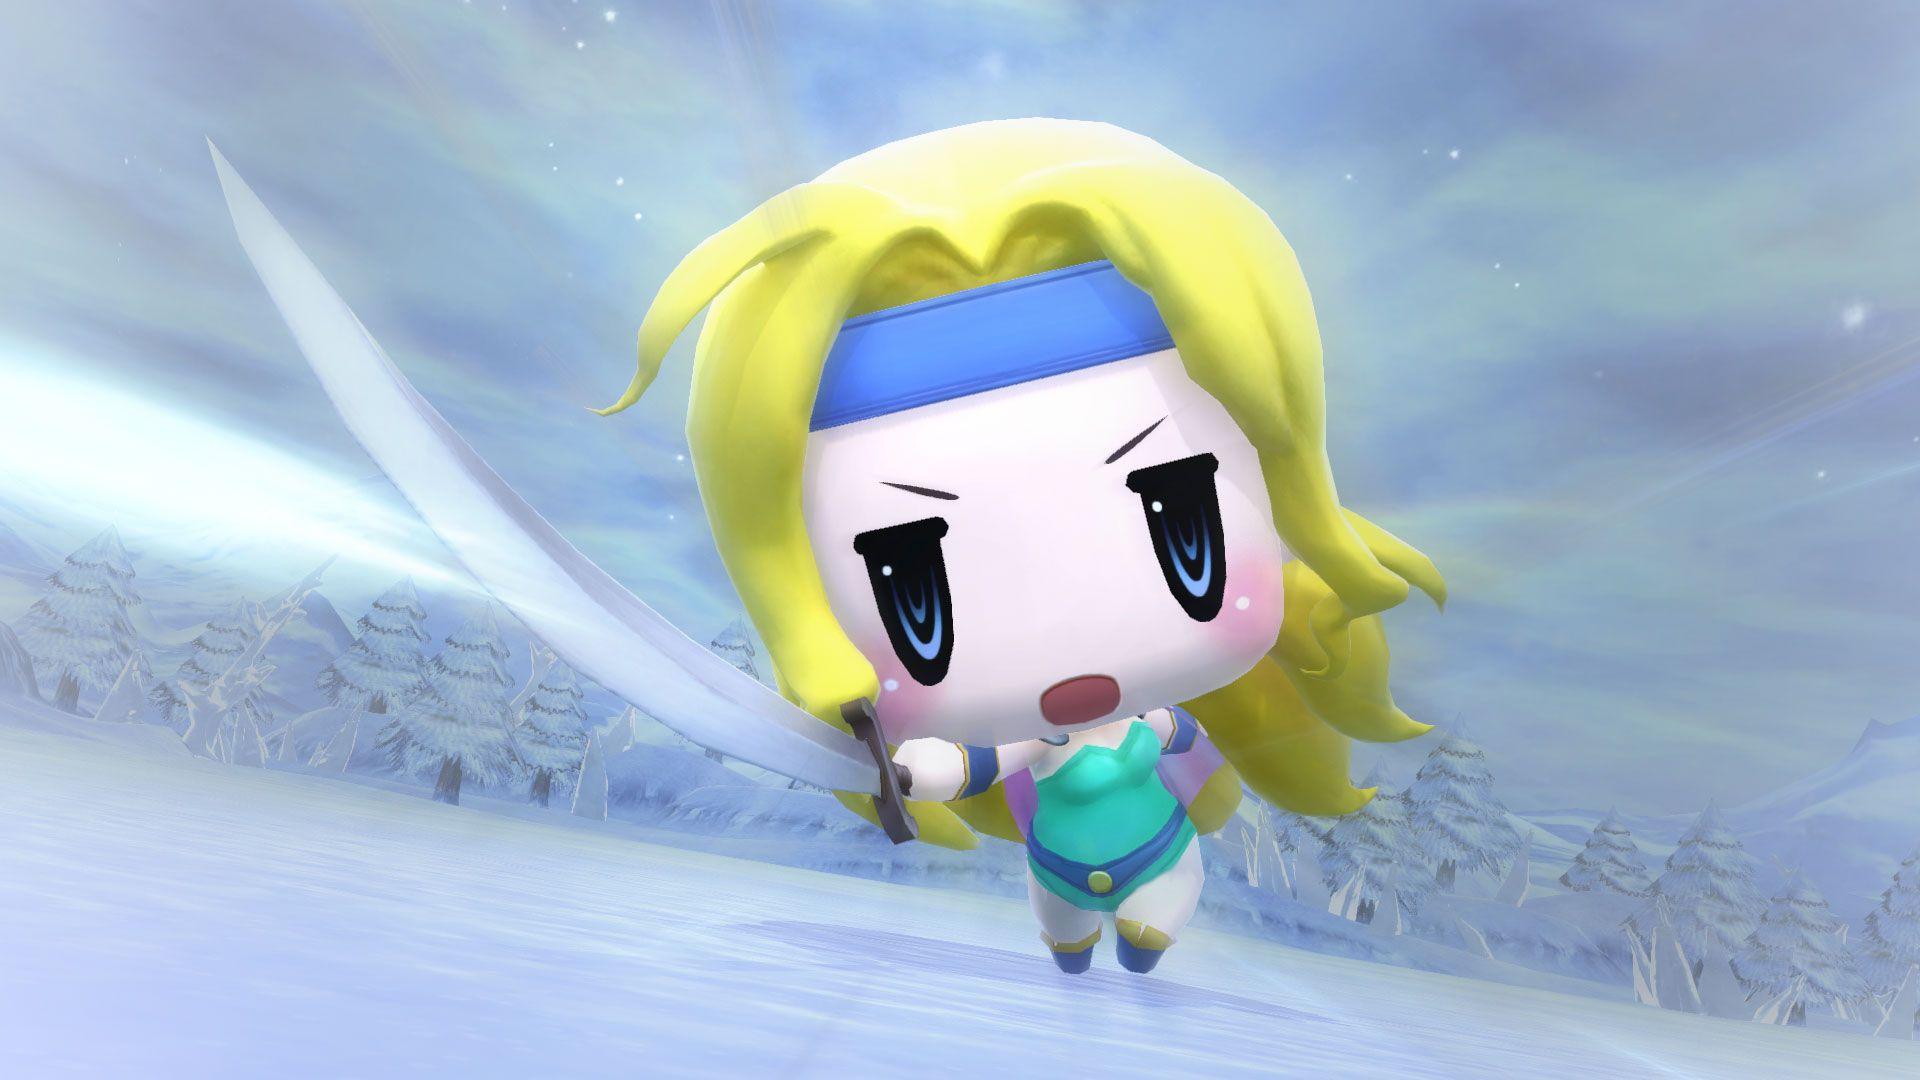 PS4 PS Vita Exclusive World Of Final Fantasy Gets Adorable 1080p